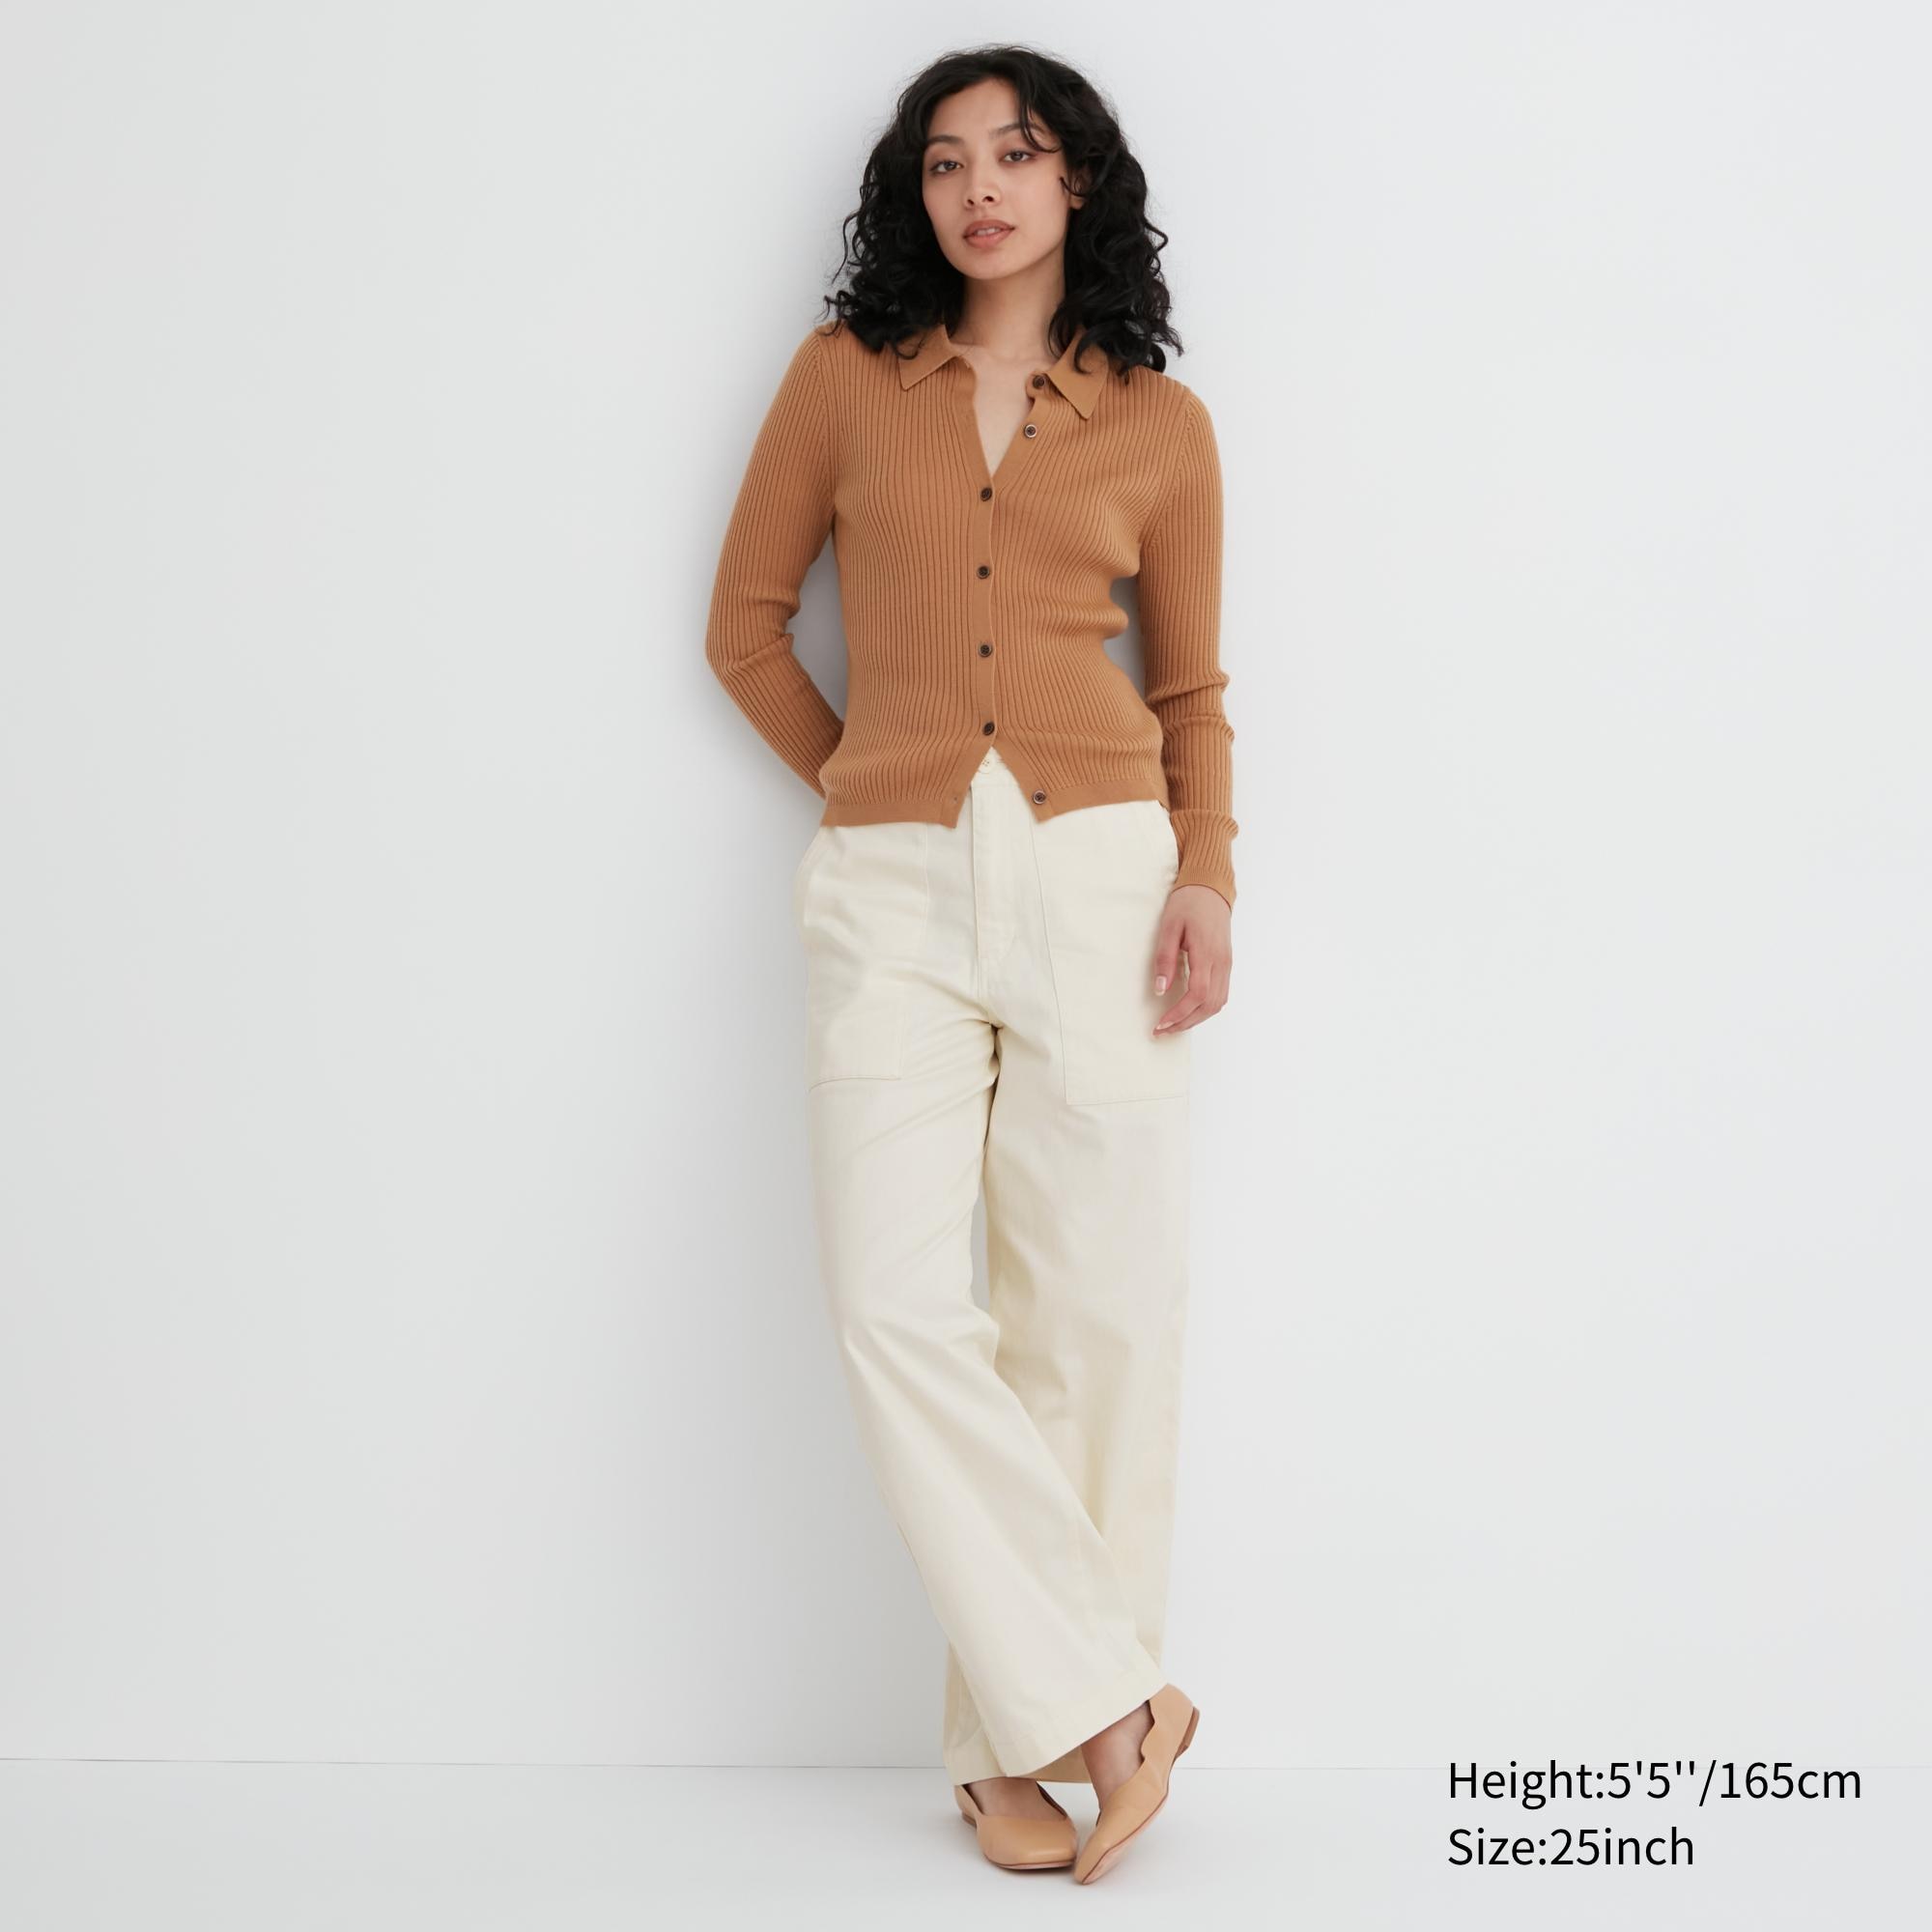 Michaela in the Uniqlo U Wide Leg Curved Pants. | Fit jeans women, Uniqlo,  Curved pants